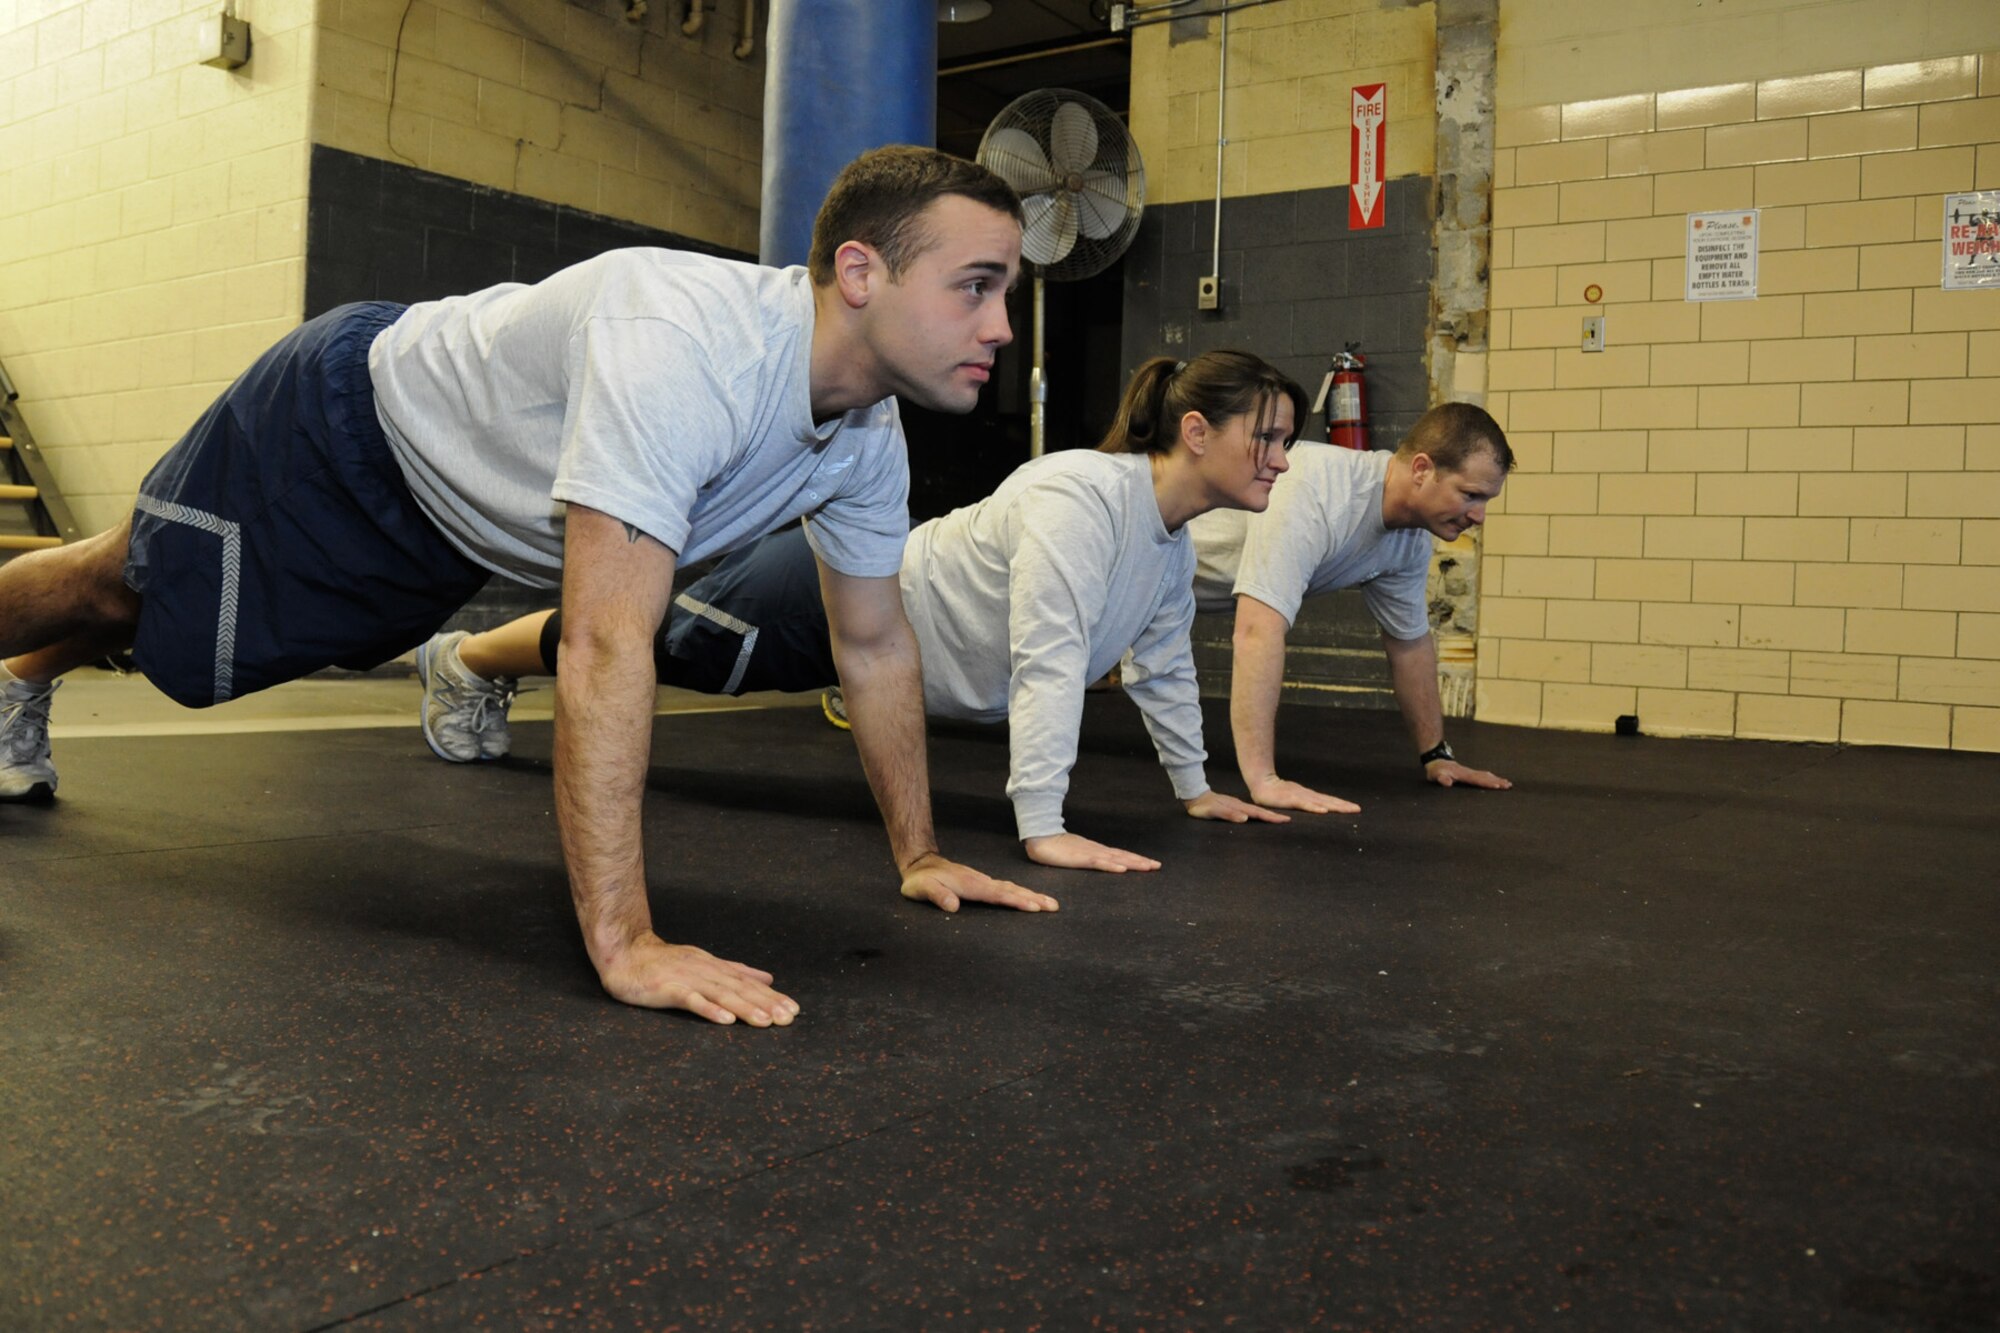 Staff Sgt. James Mack, Technical Sgt. Janice Stockett, and Staff Sgt. Eric McCulley, all members of the 127th Security Forces Squadron at Selfridge Air National Guard Base, Mich., recently earned Physical Training Leader Certification. They are seen in the 127th Wing’s fitness center, Feb. 10, 2013. The certification identifies them by the Air Force as qualified fitness training leaders for the 127th Wing.  (Air National Guard Photo by TSgt. Robert Hanet)